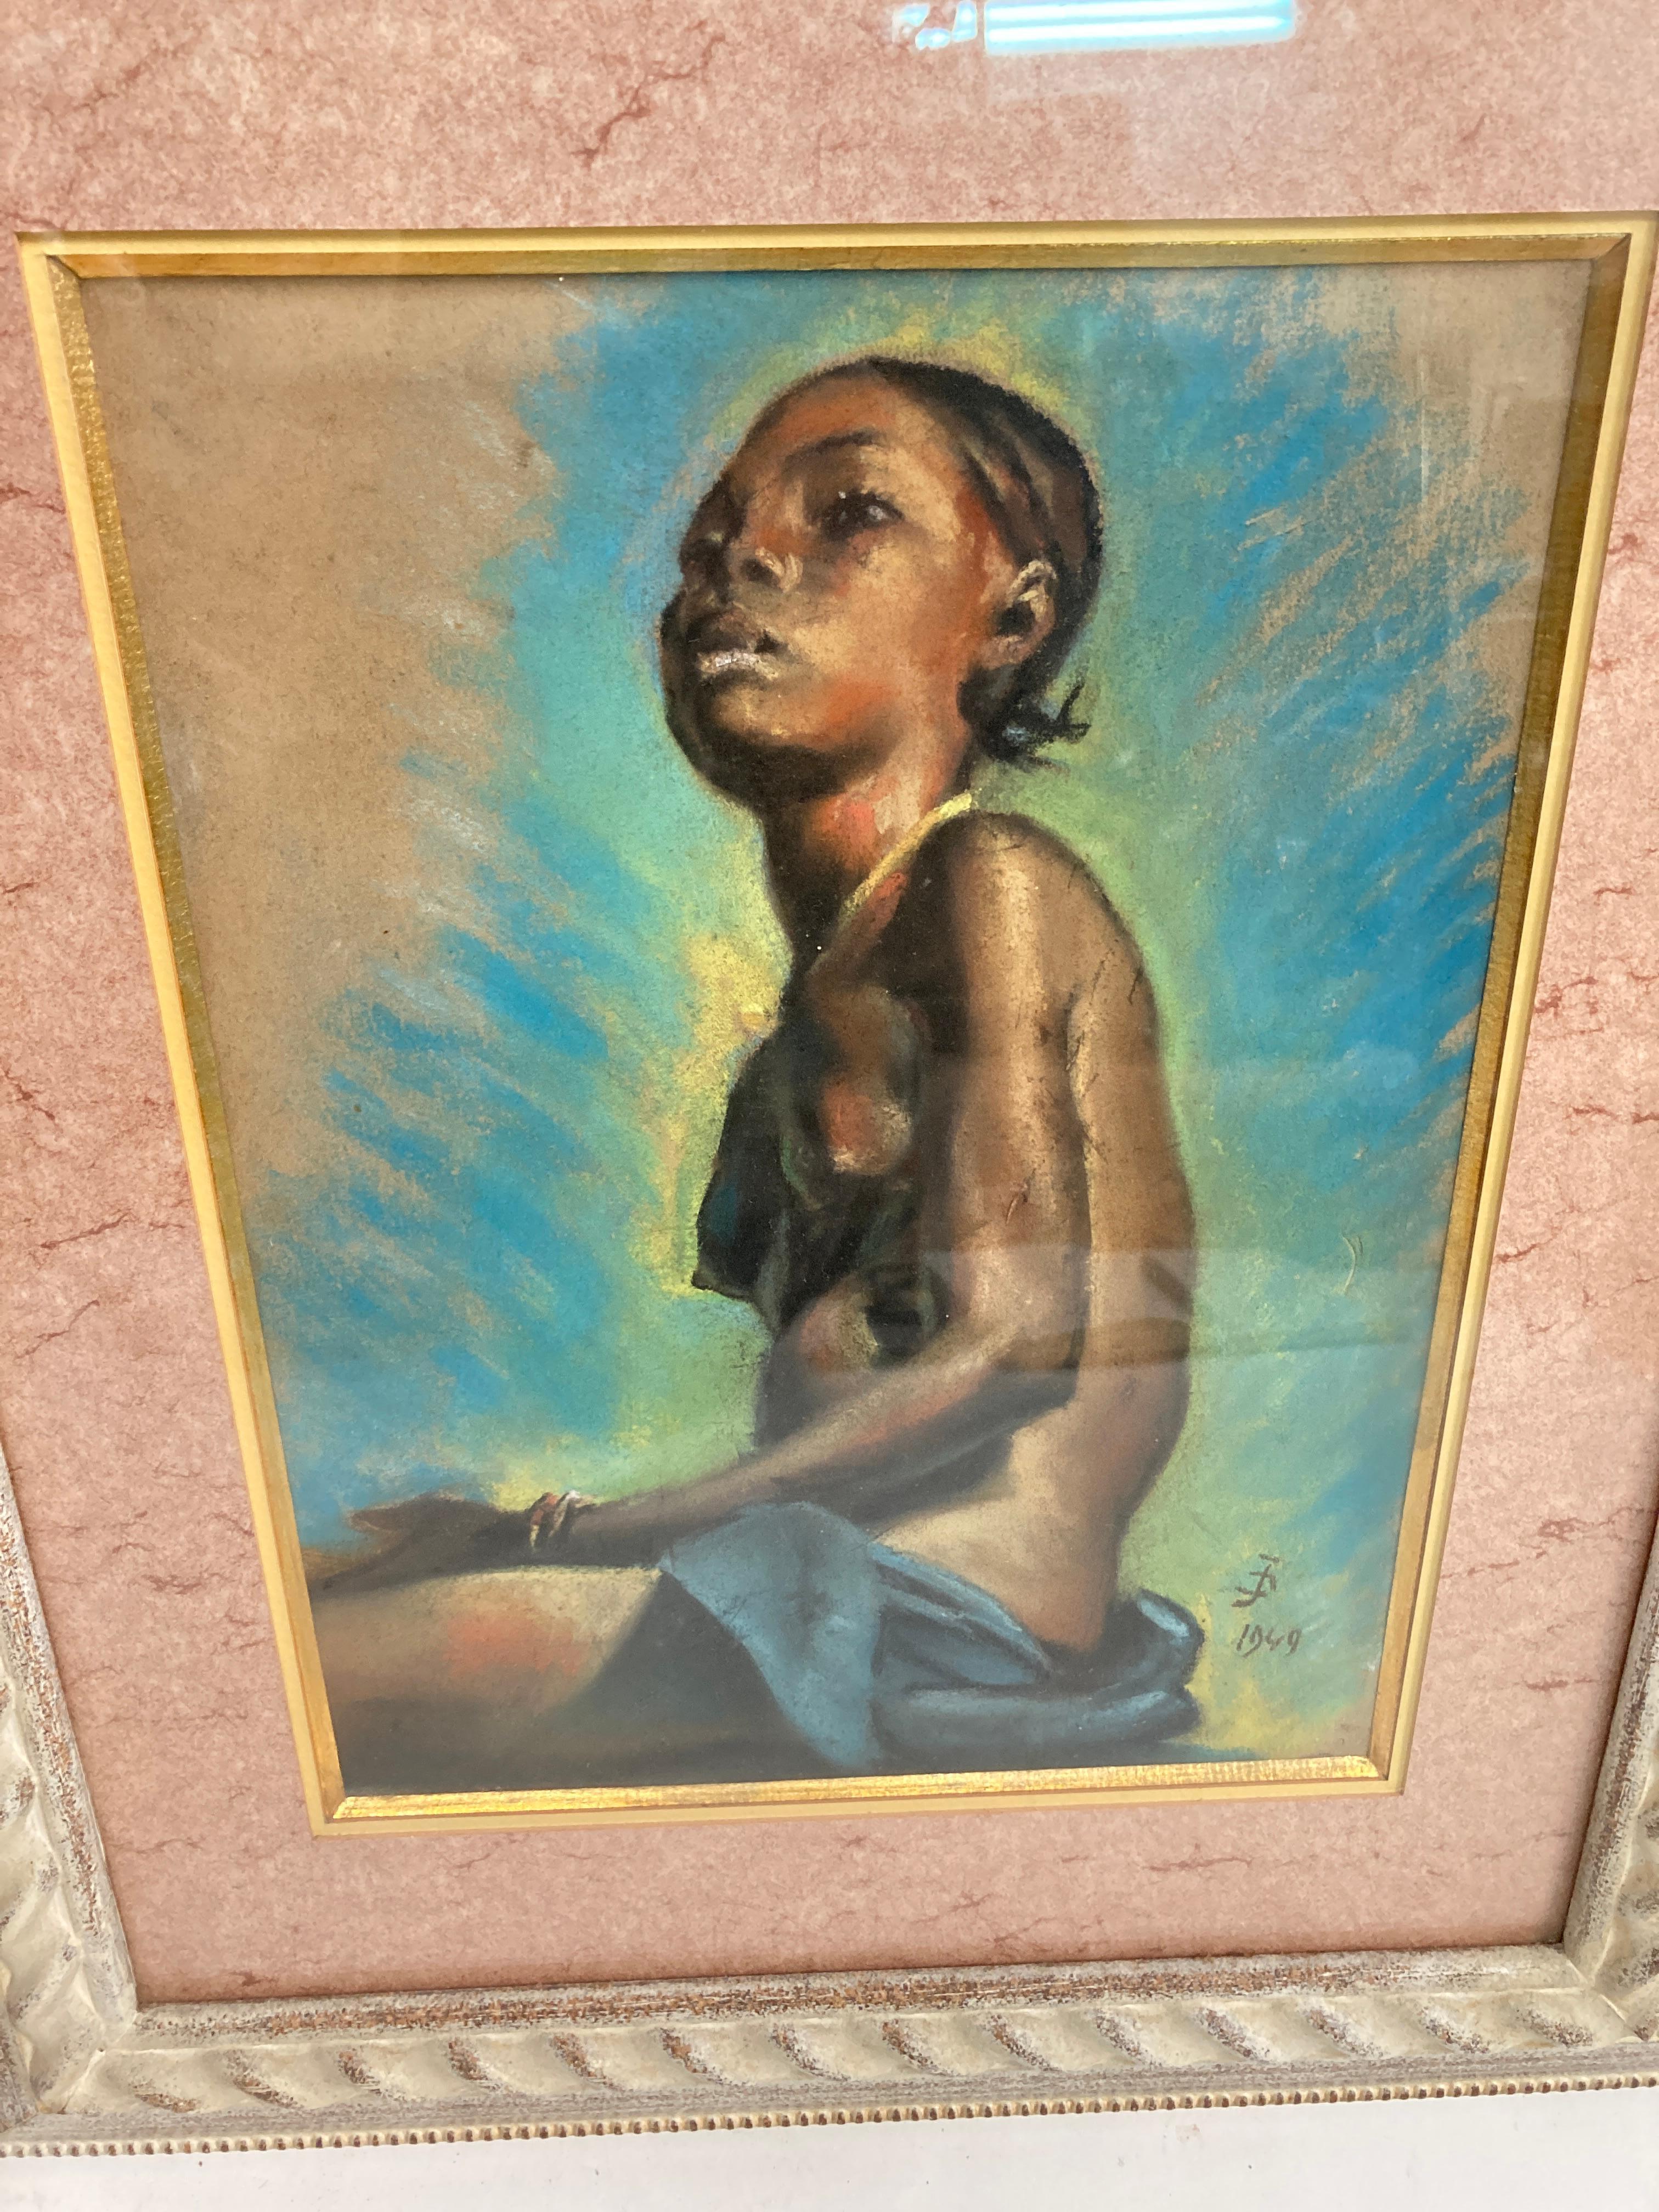 Pastel painting show a young African woman 
Dated 1949
Monogrammed J E